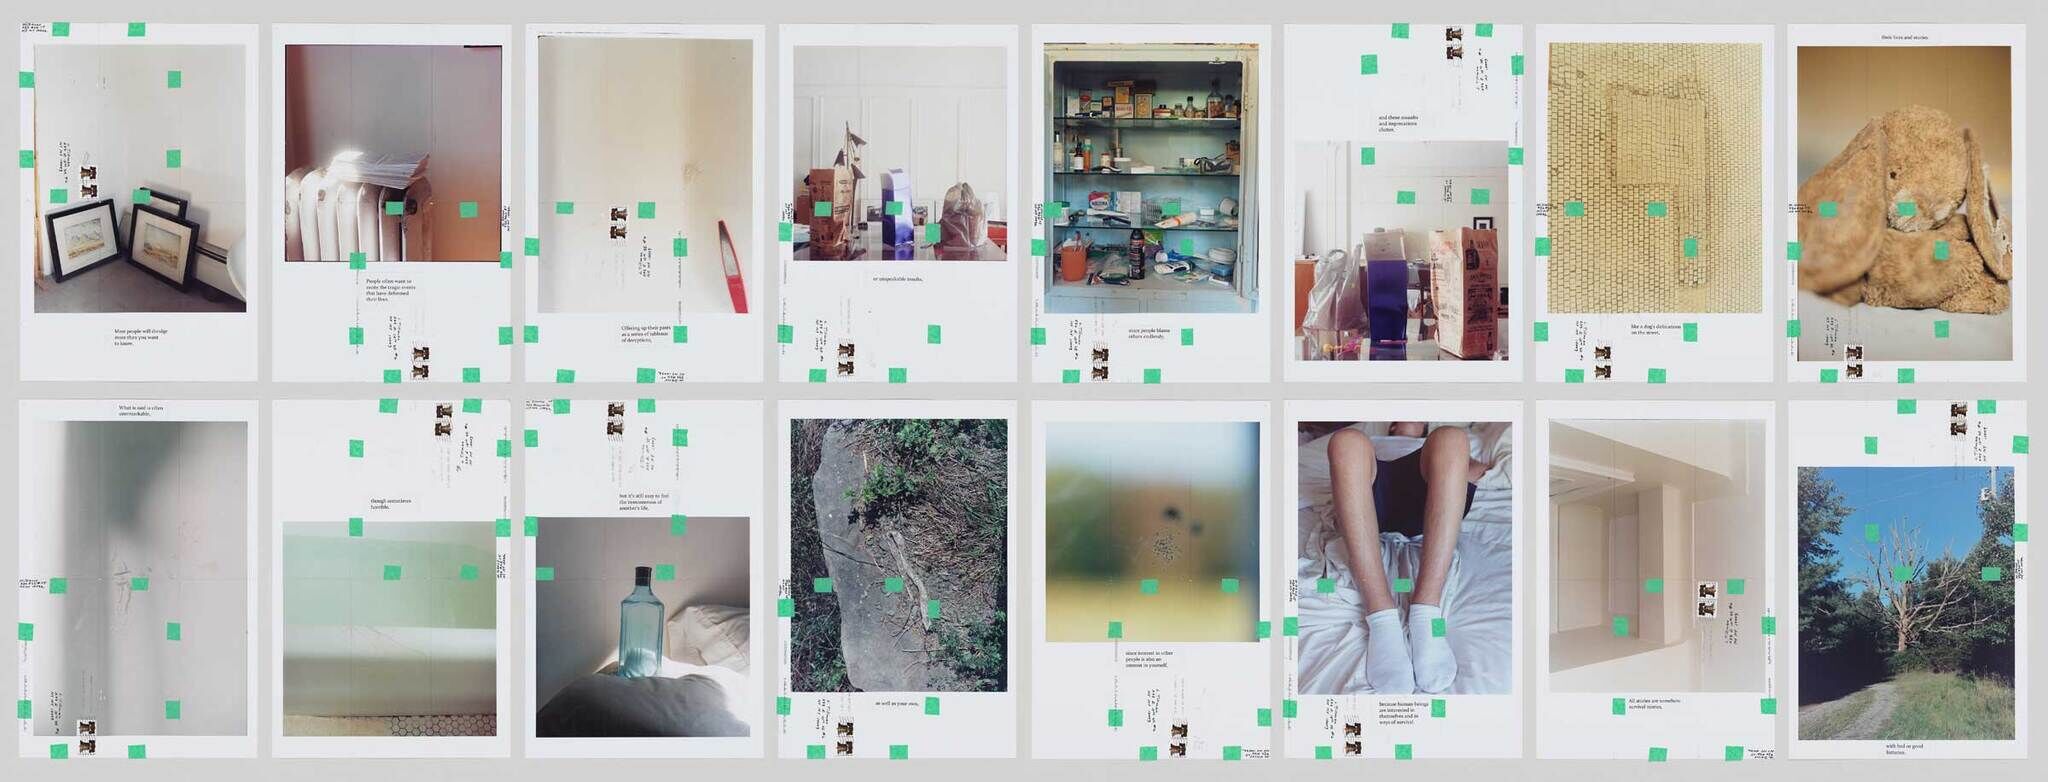 A collage of 16 photographs of various household items with green grids and writing all over.